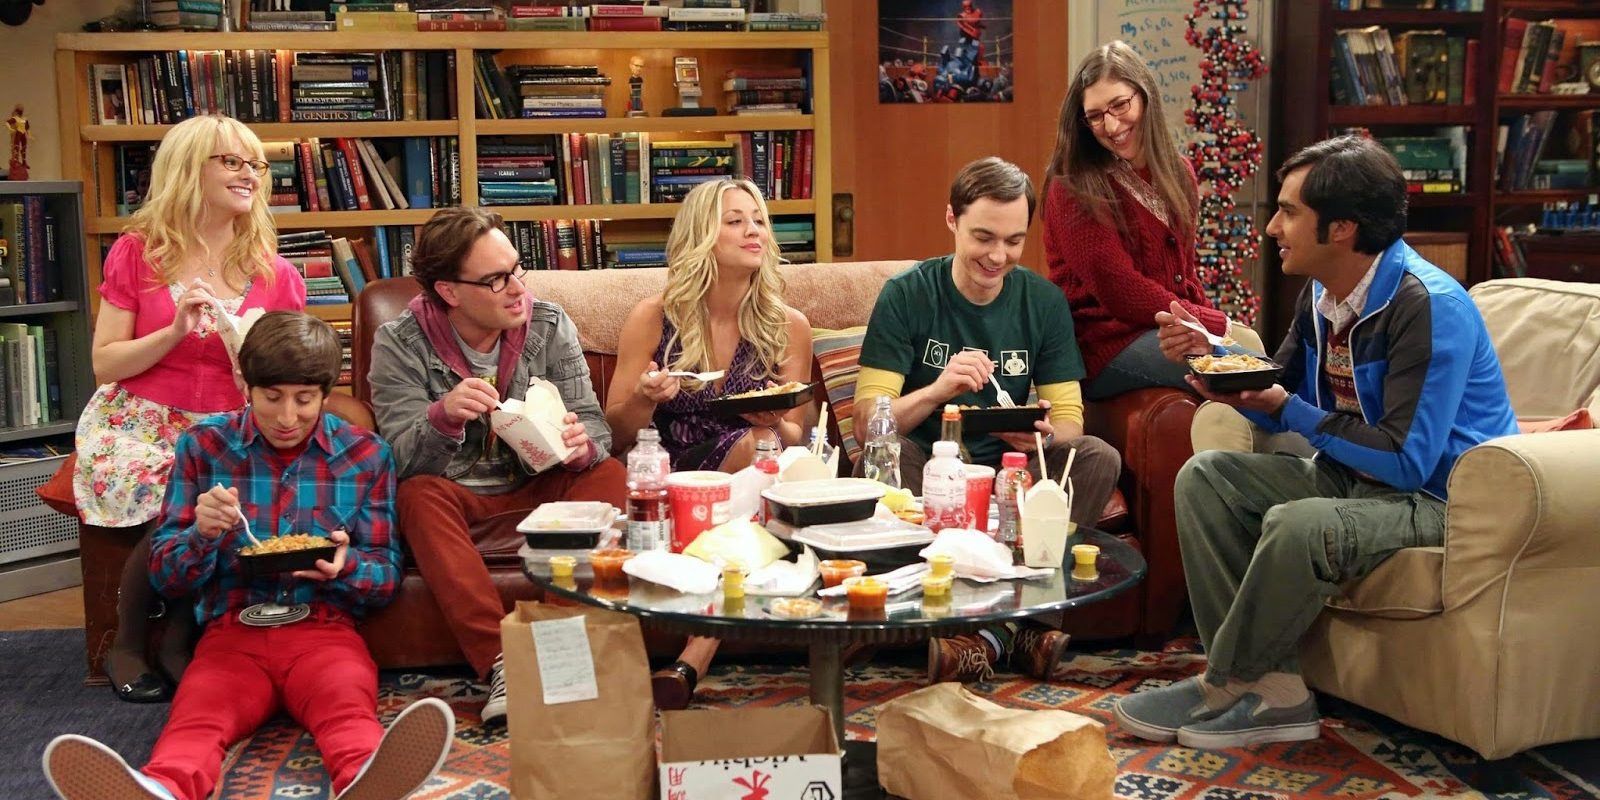 The gang in The Big Bang Theory eating take out